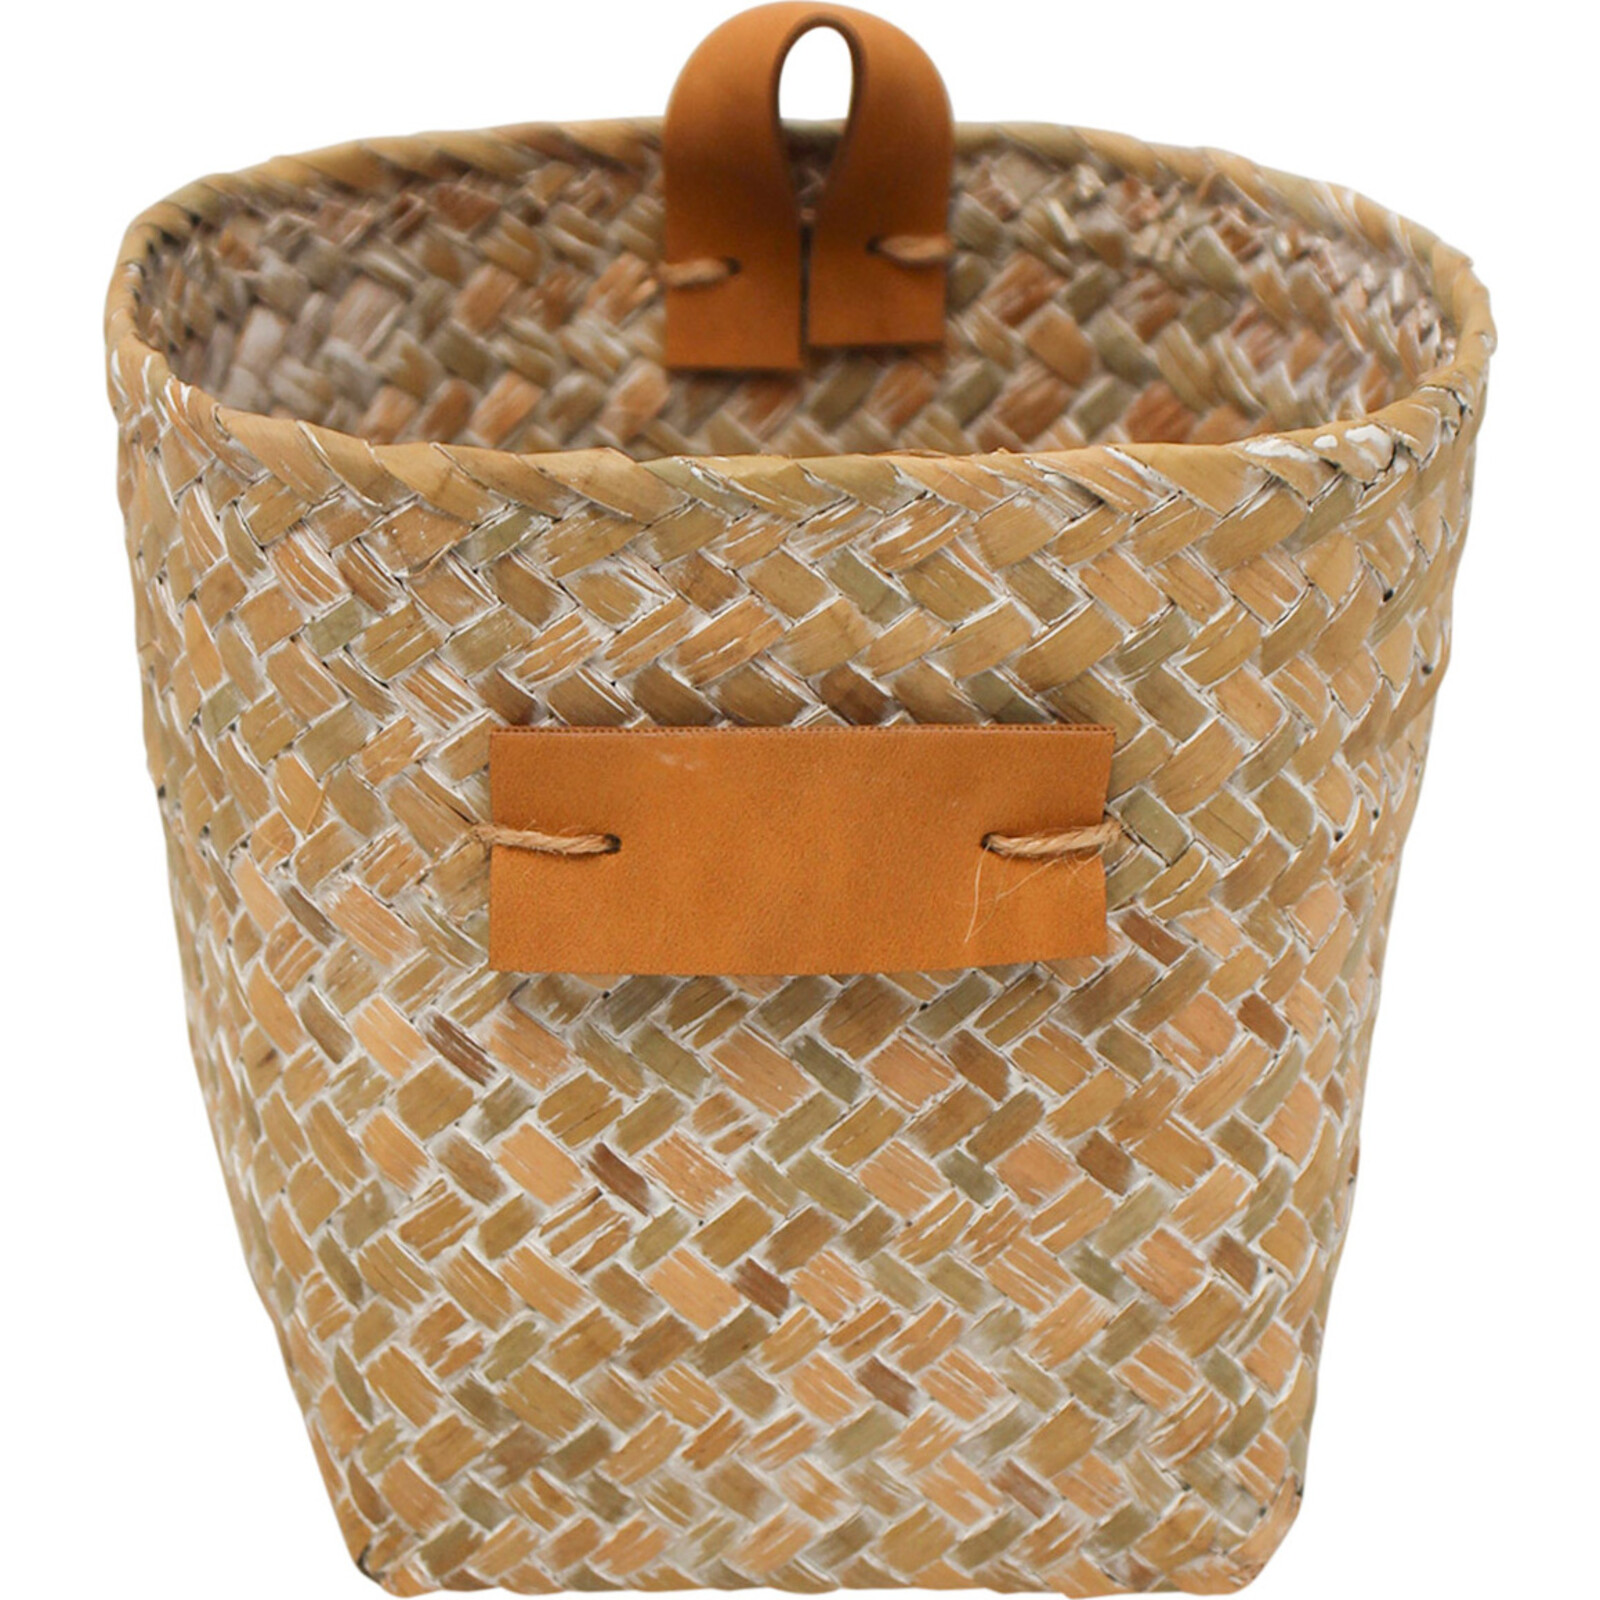 Woven Tidy/Planter Wash